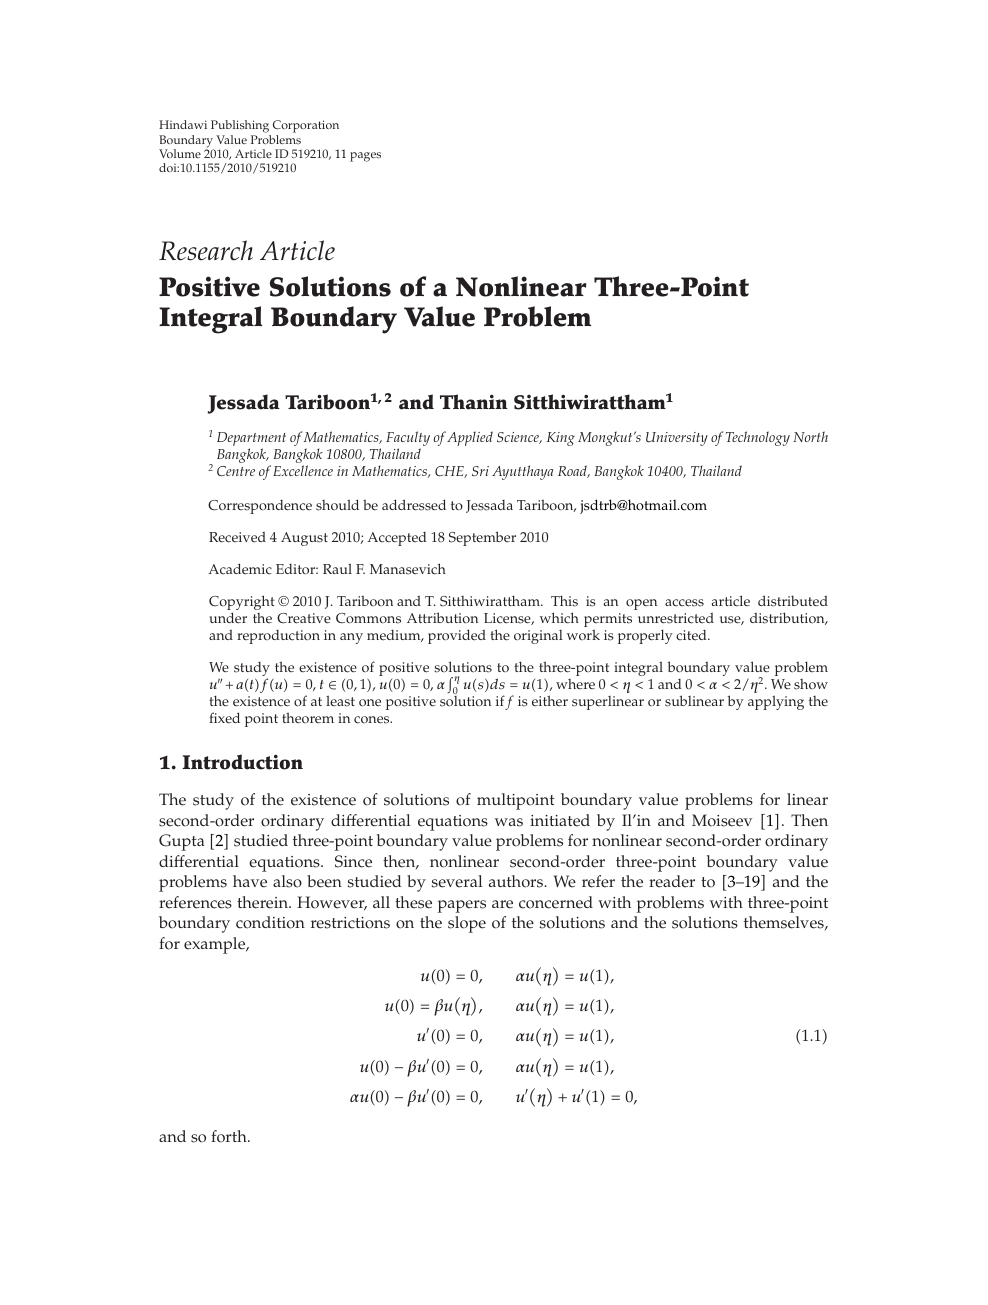 Positive Solutions Of A Nonlinear Three Point Integral Boundary Value Problem Topic Of Research Paper In Mathematics Download Scholarly Article Pdf And Read For Free On Cyberleninka Open Science Hub